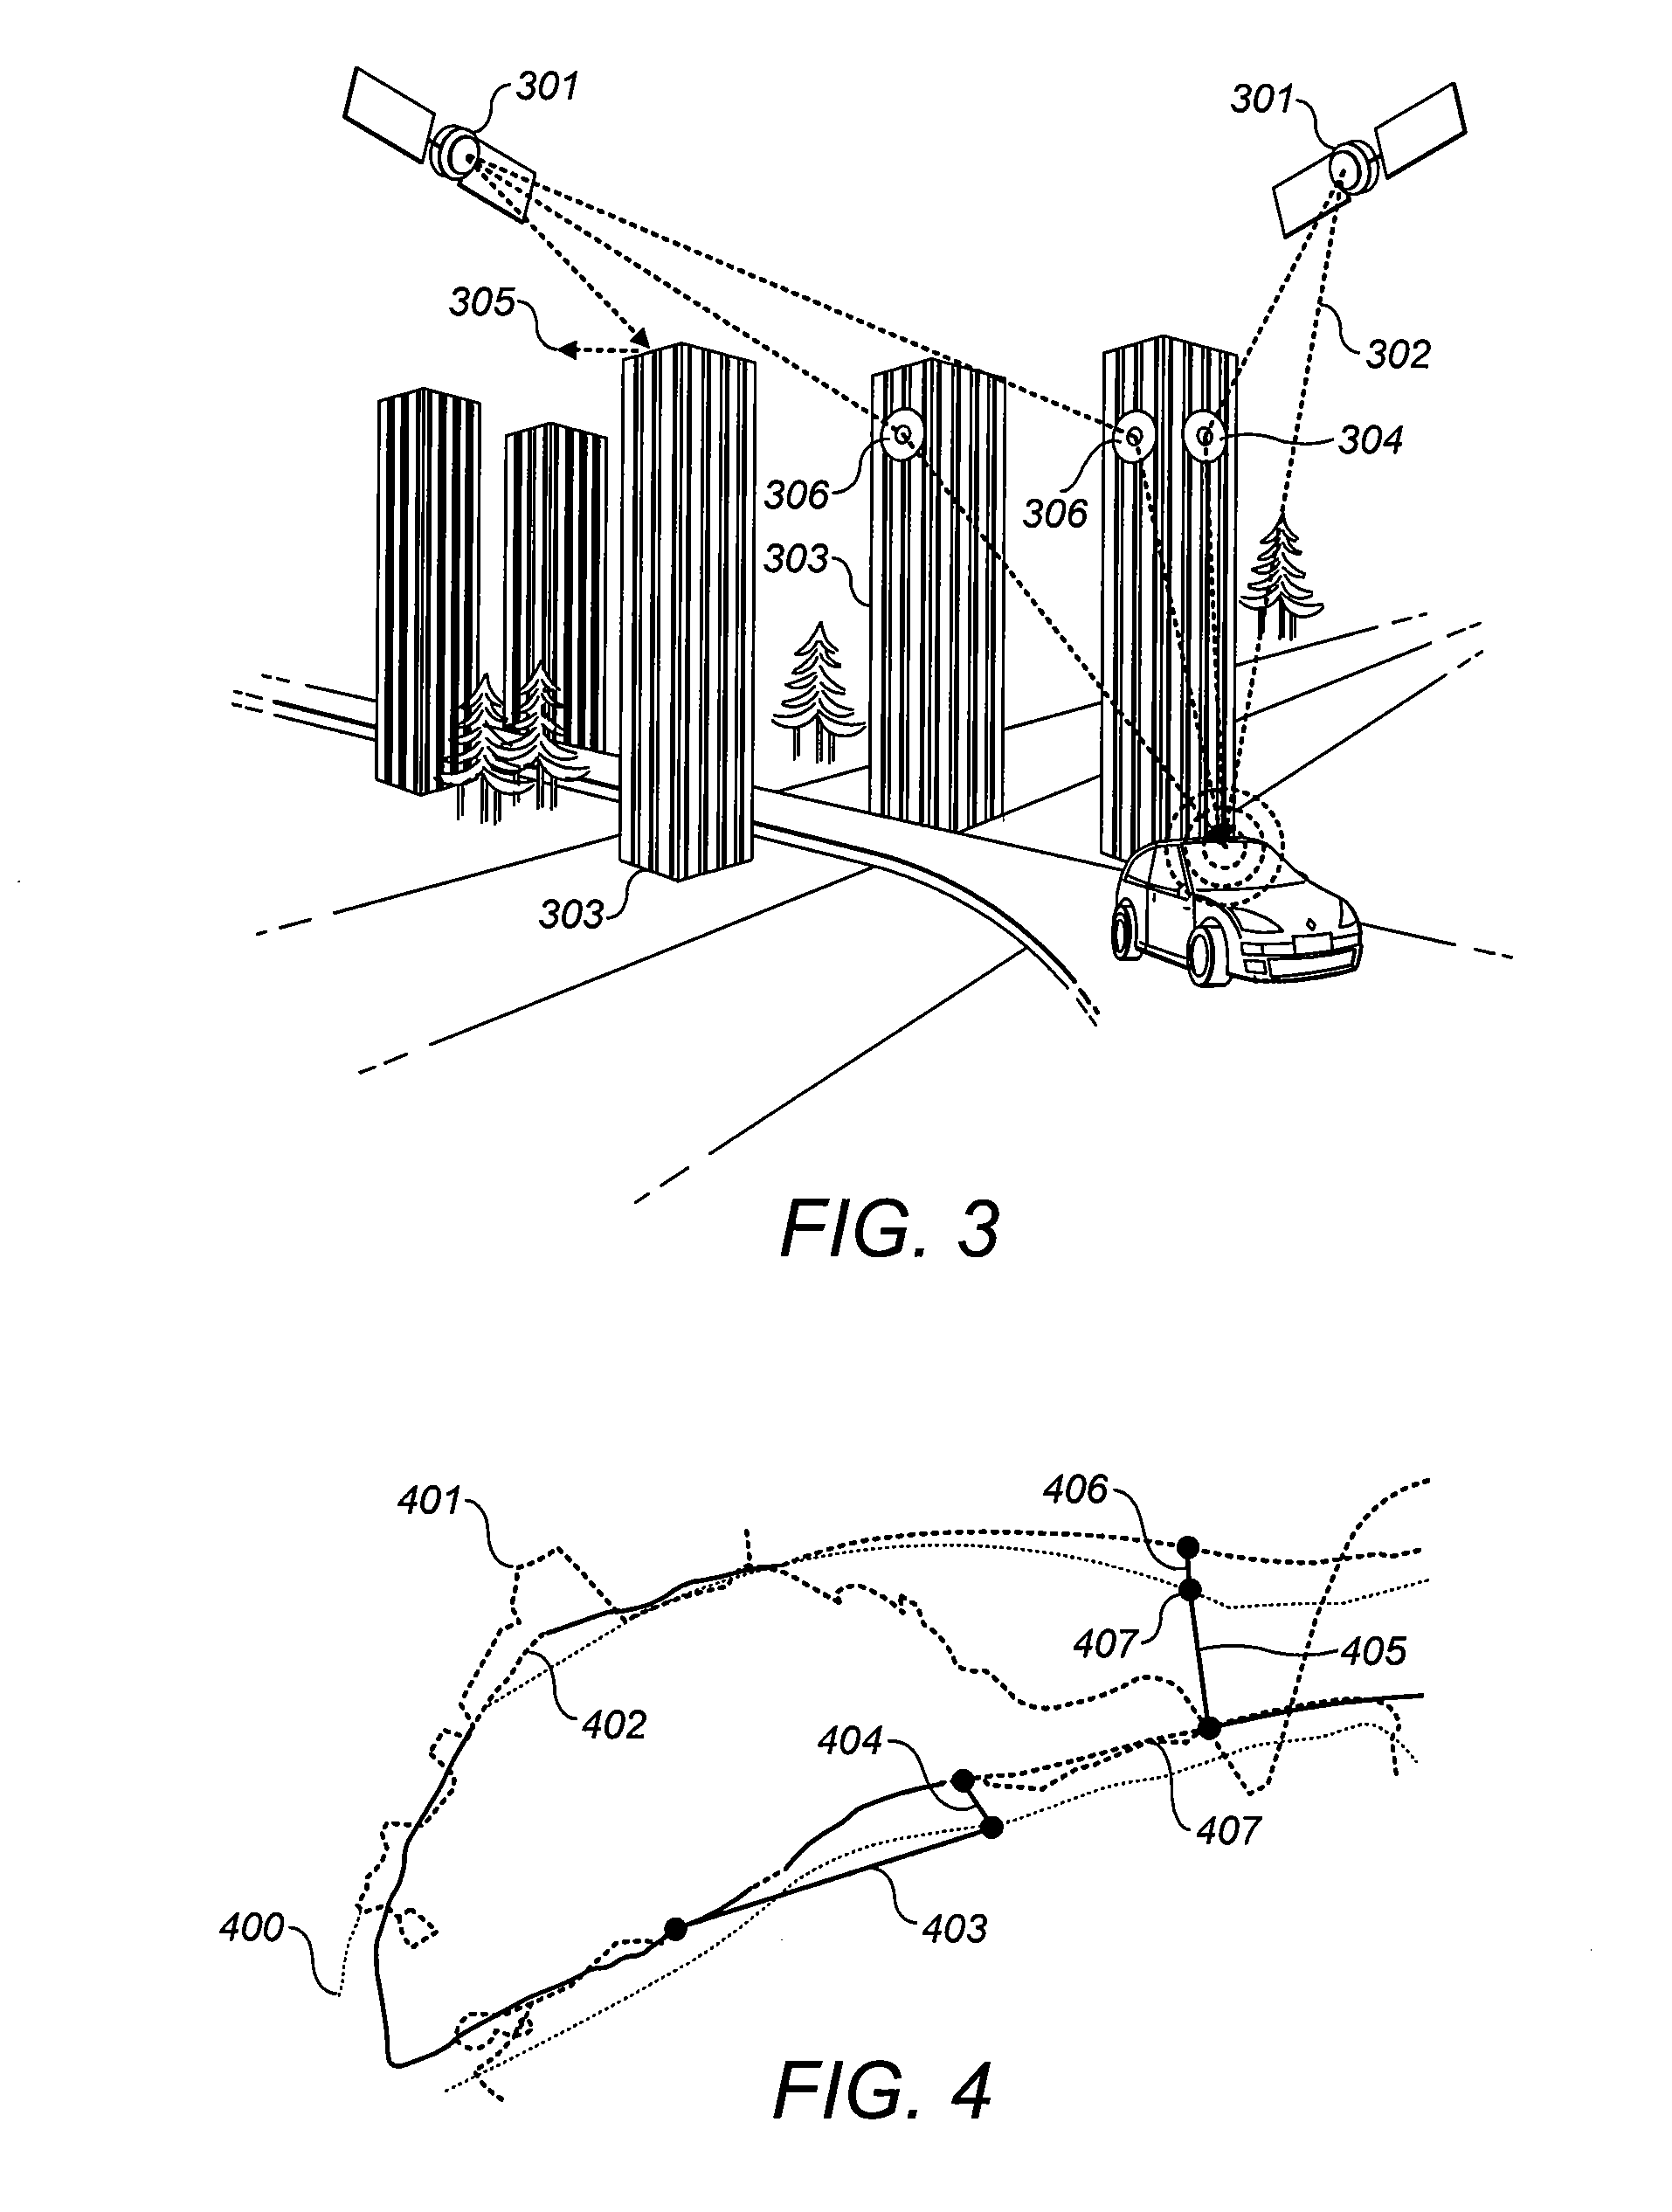 Method and process to ensure that a vehicular travel path recording that includes positional errors can be used to determine a reliable and repeatable road user charge